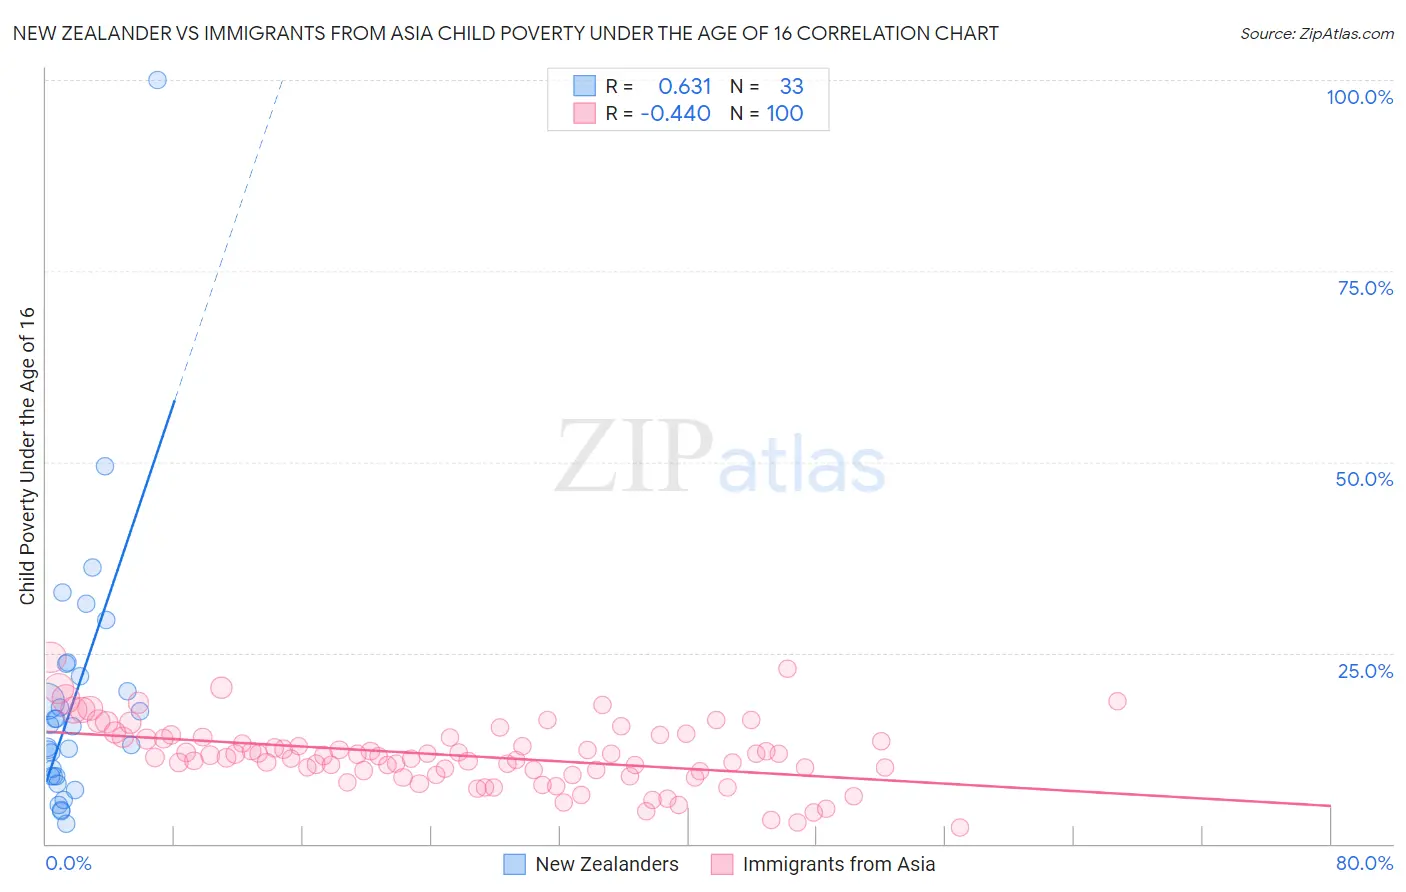 New Zealander vs Immigrants from Asia Child Poverty Under the Age of 16